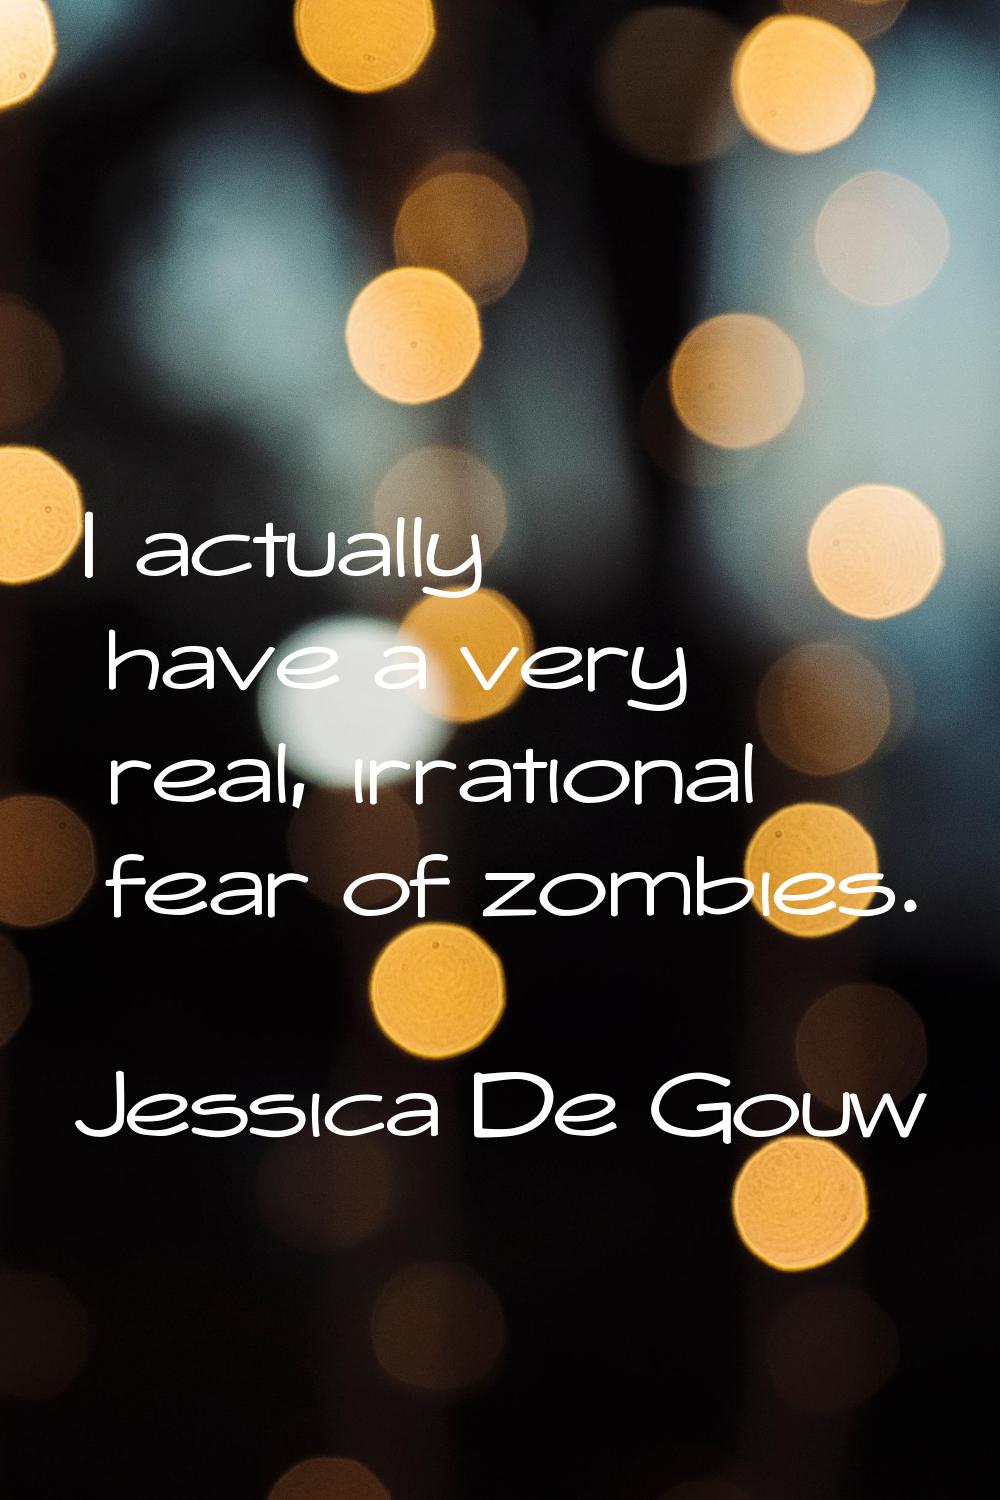 I actually have a very real, irrational fear of zombies.